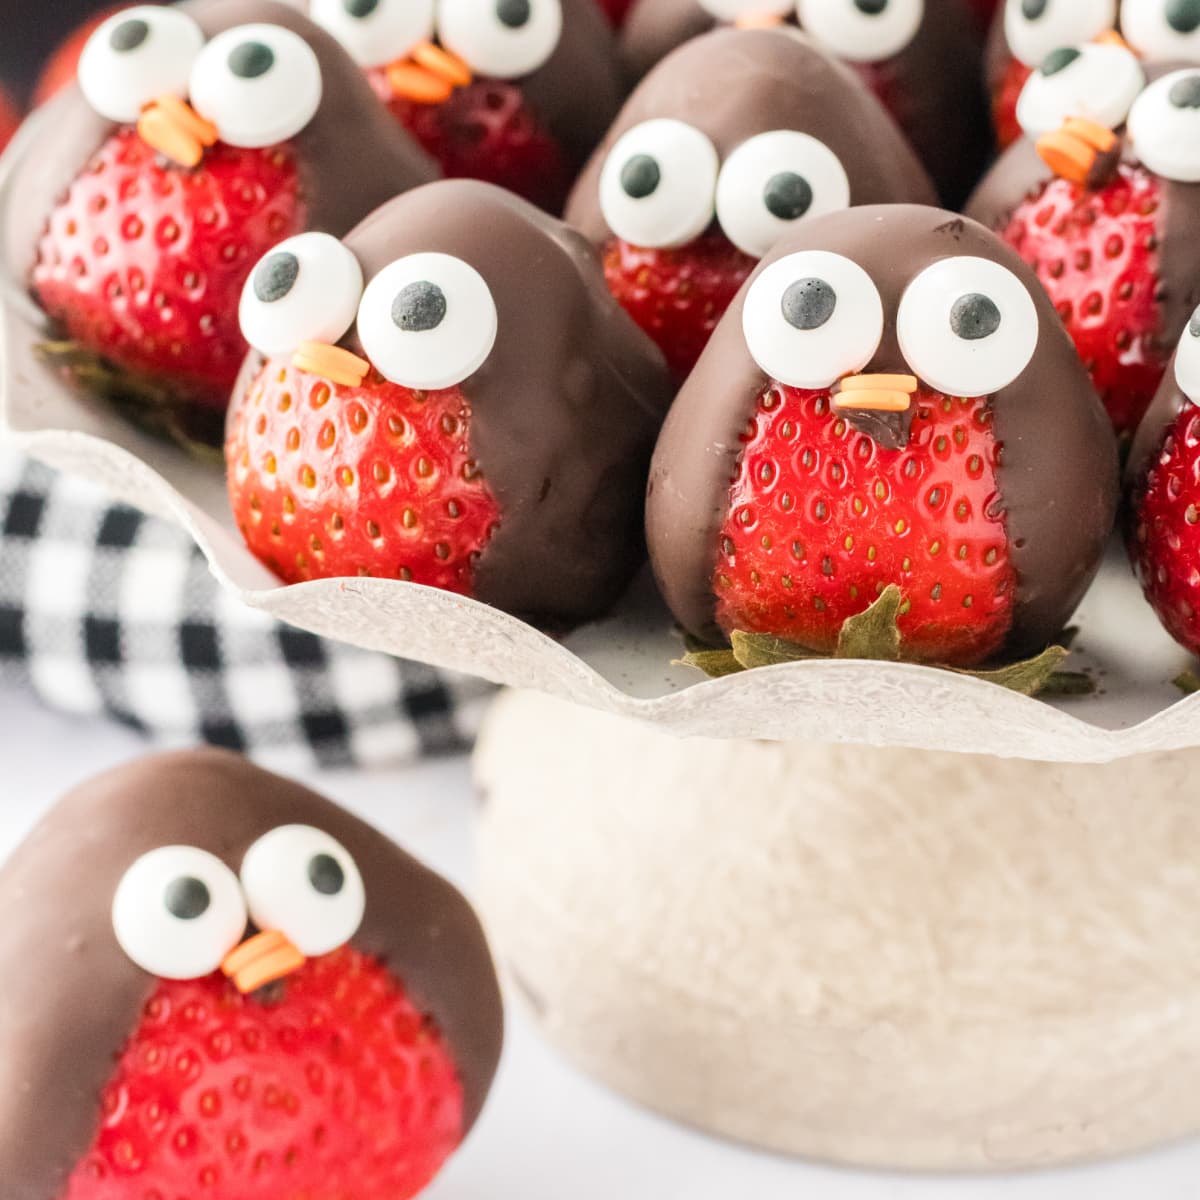 Chocolate Covered Strawberry Penguins feature